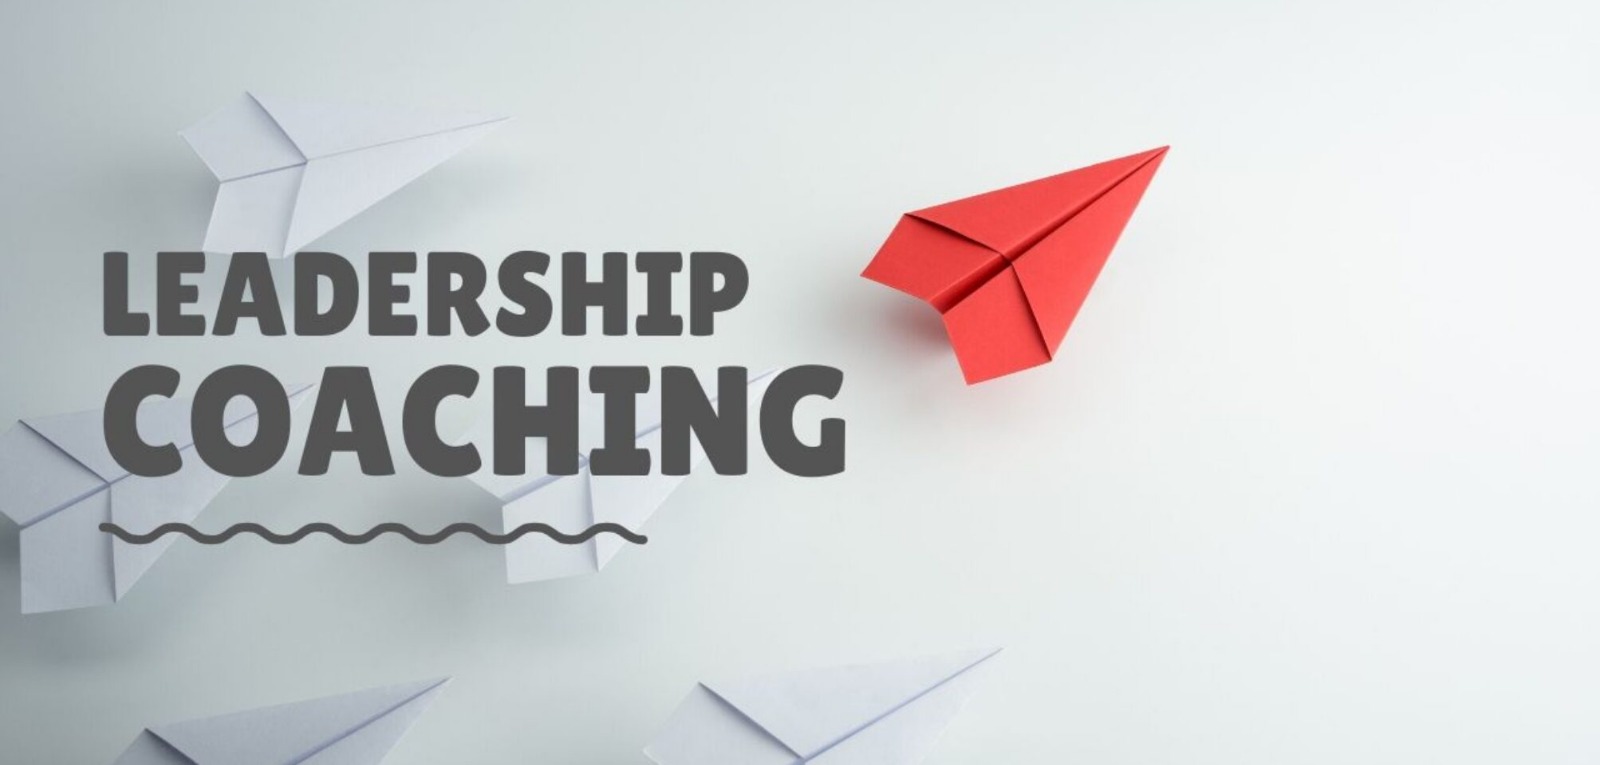 Leadership traits that Leadership Coaching can refine in you